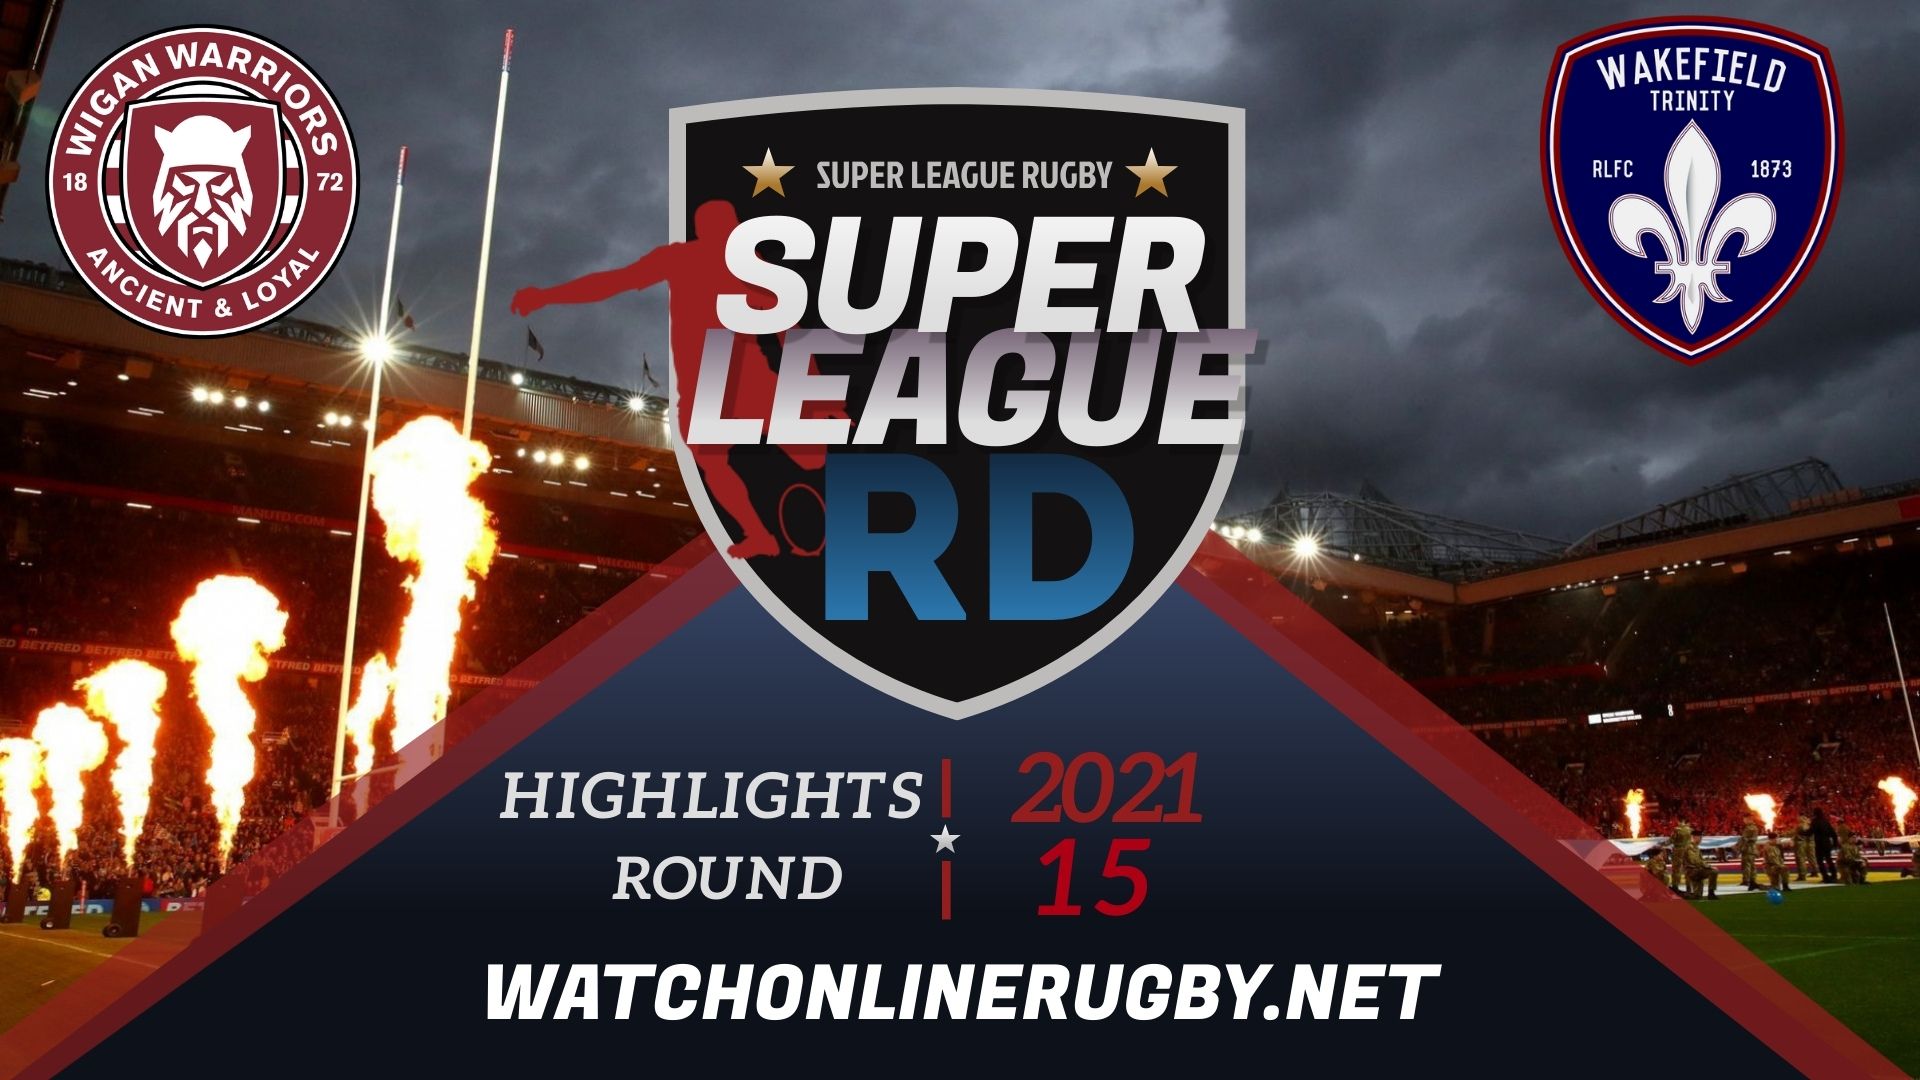 Wigan Warriors Vs Wakefield Trinity Super League Rugby 2021 RD 15